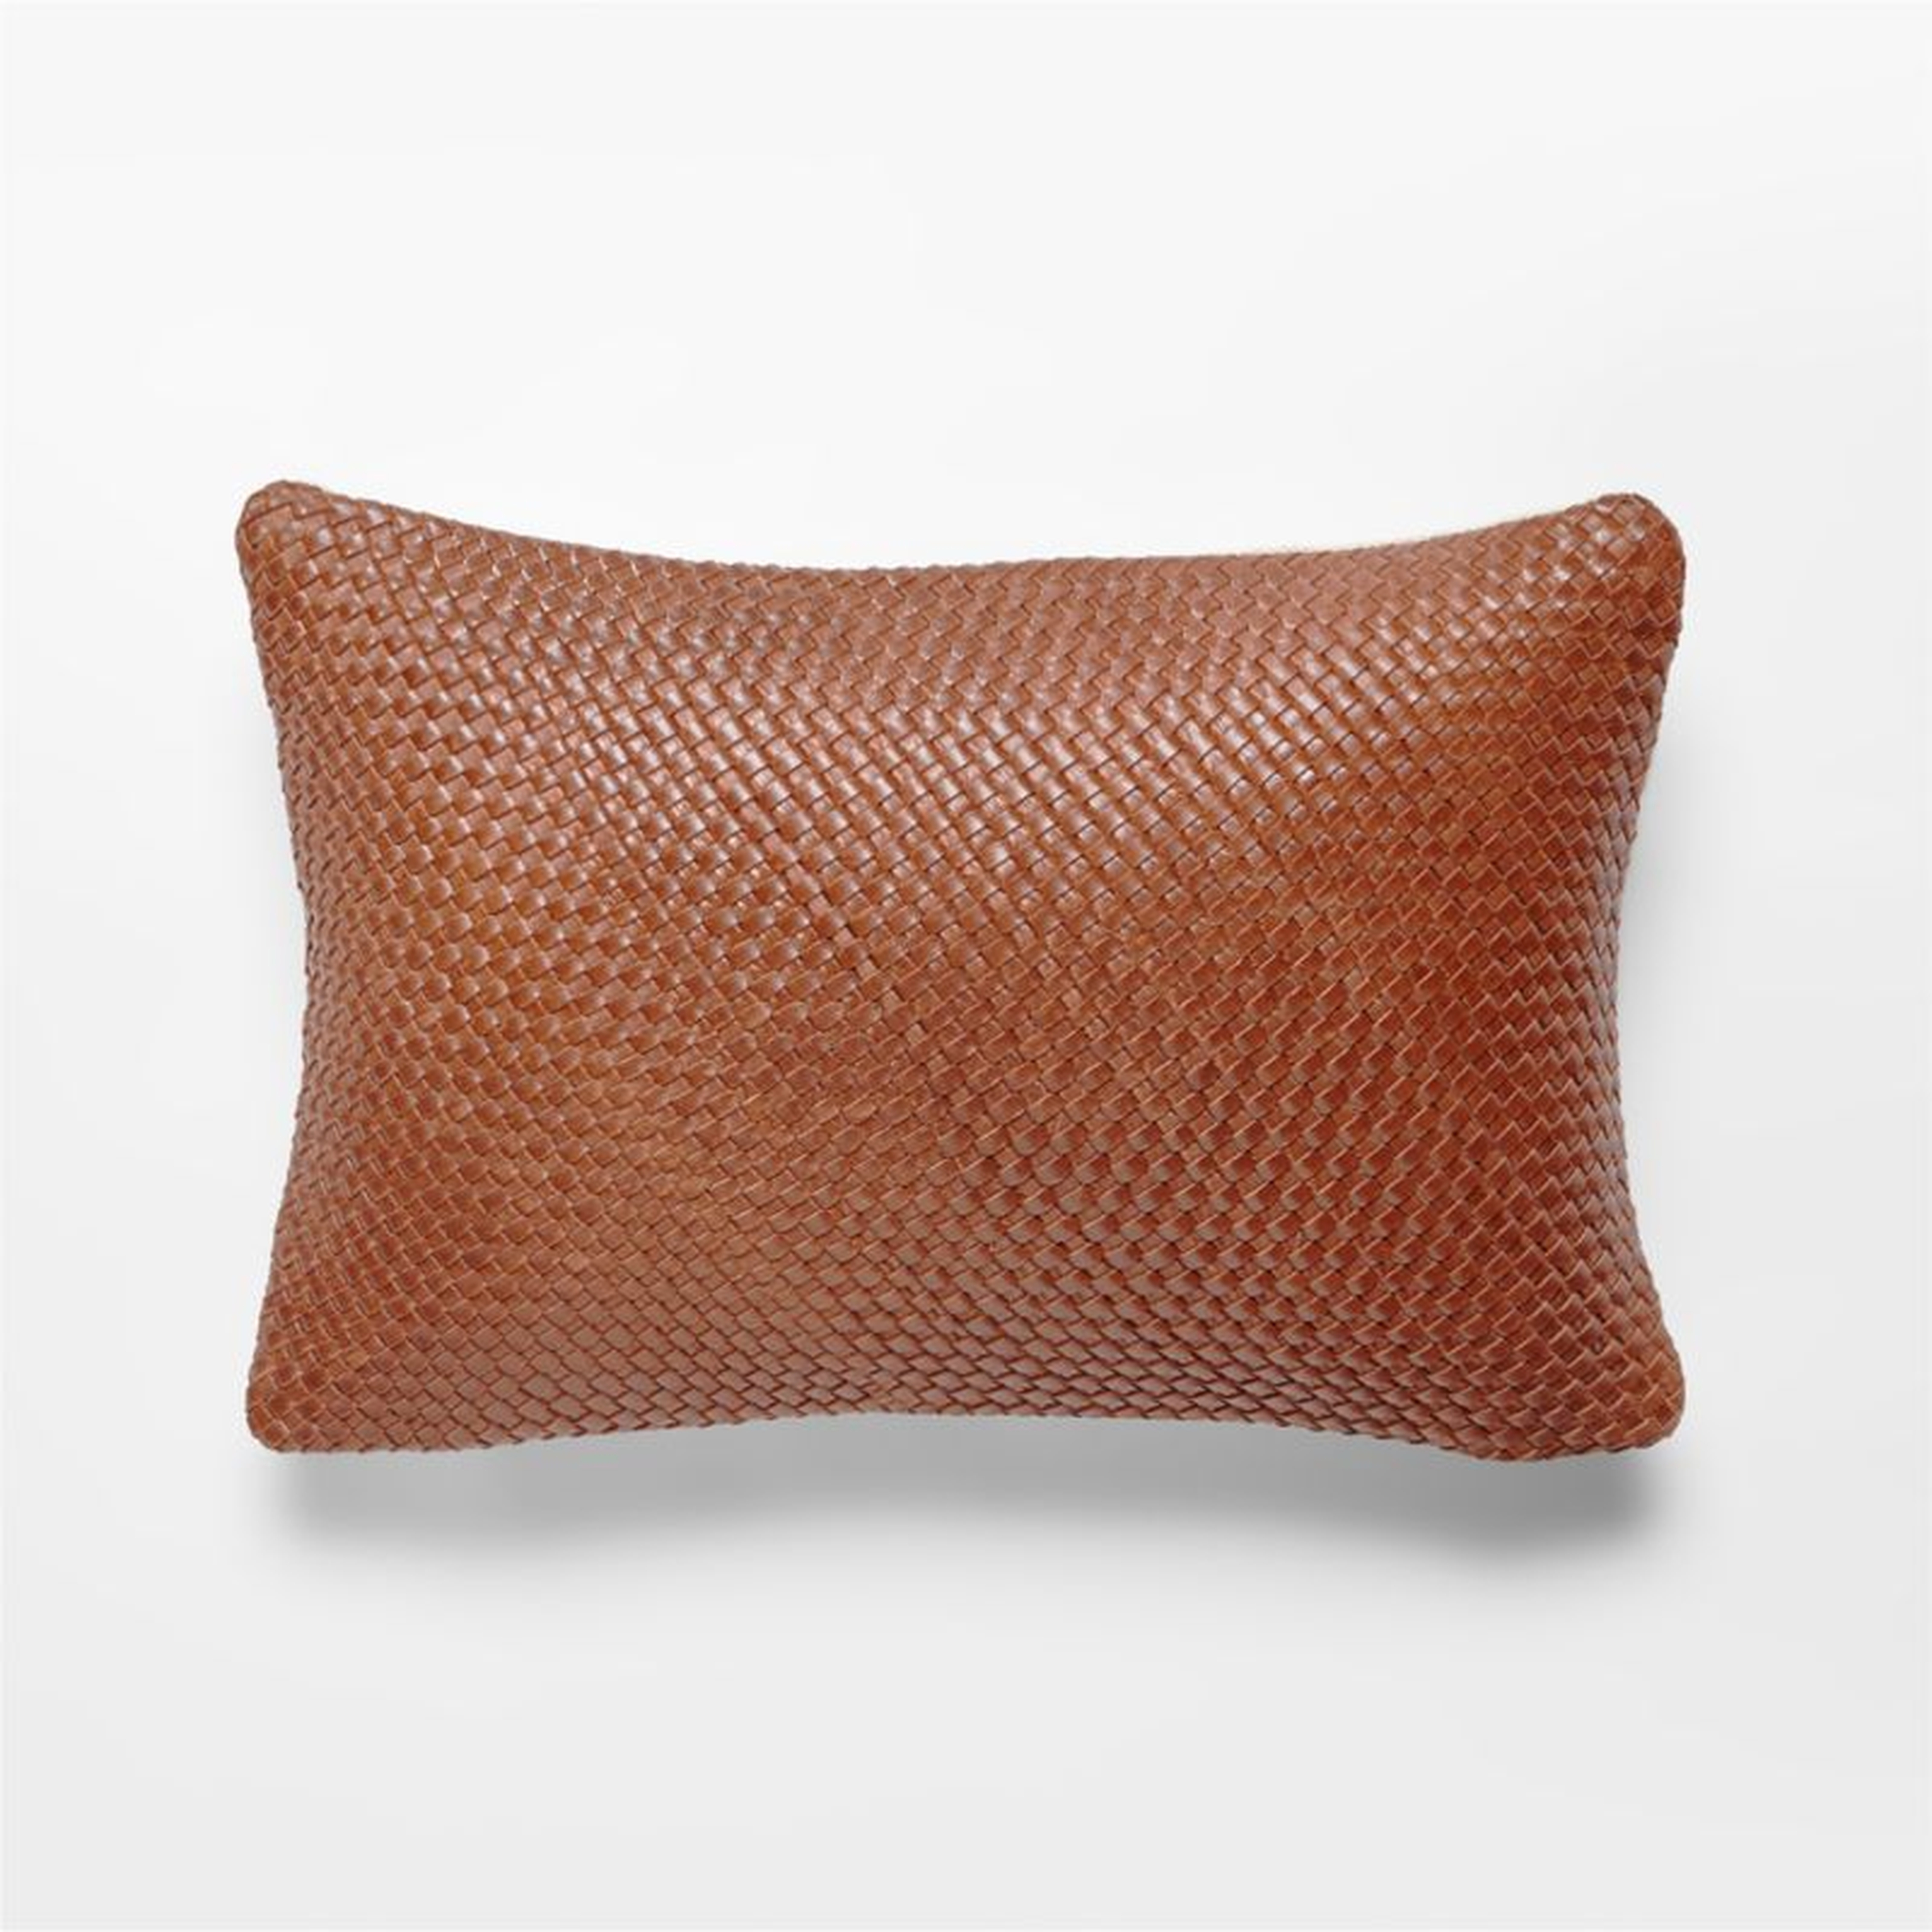 Route Leather Chocolate Pillow, Chocolate, 18" x 12" - CB2